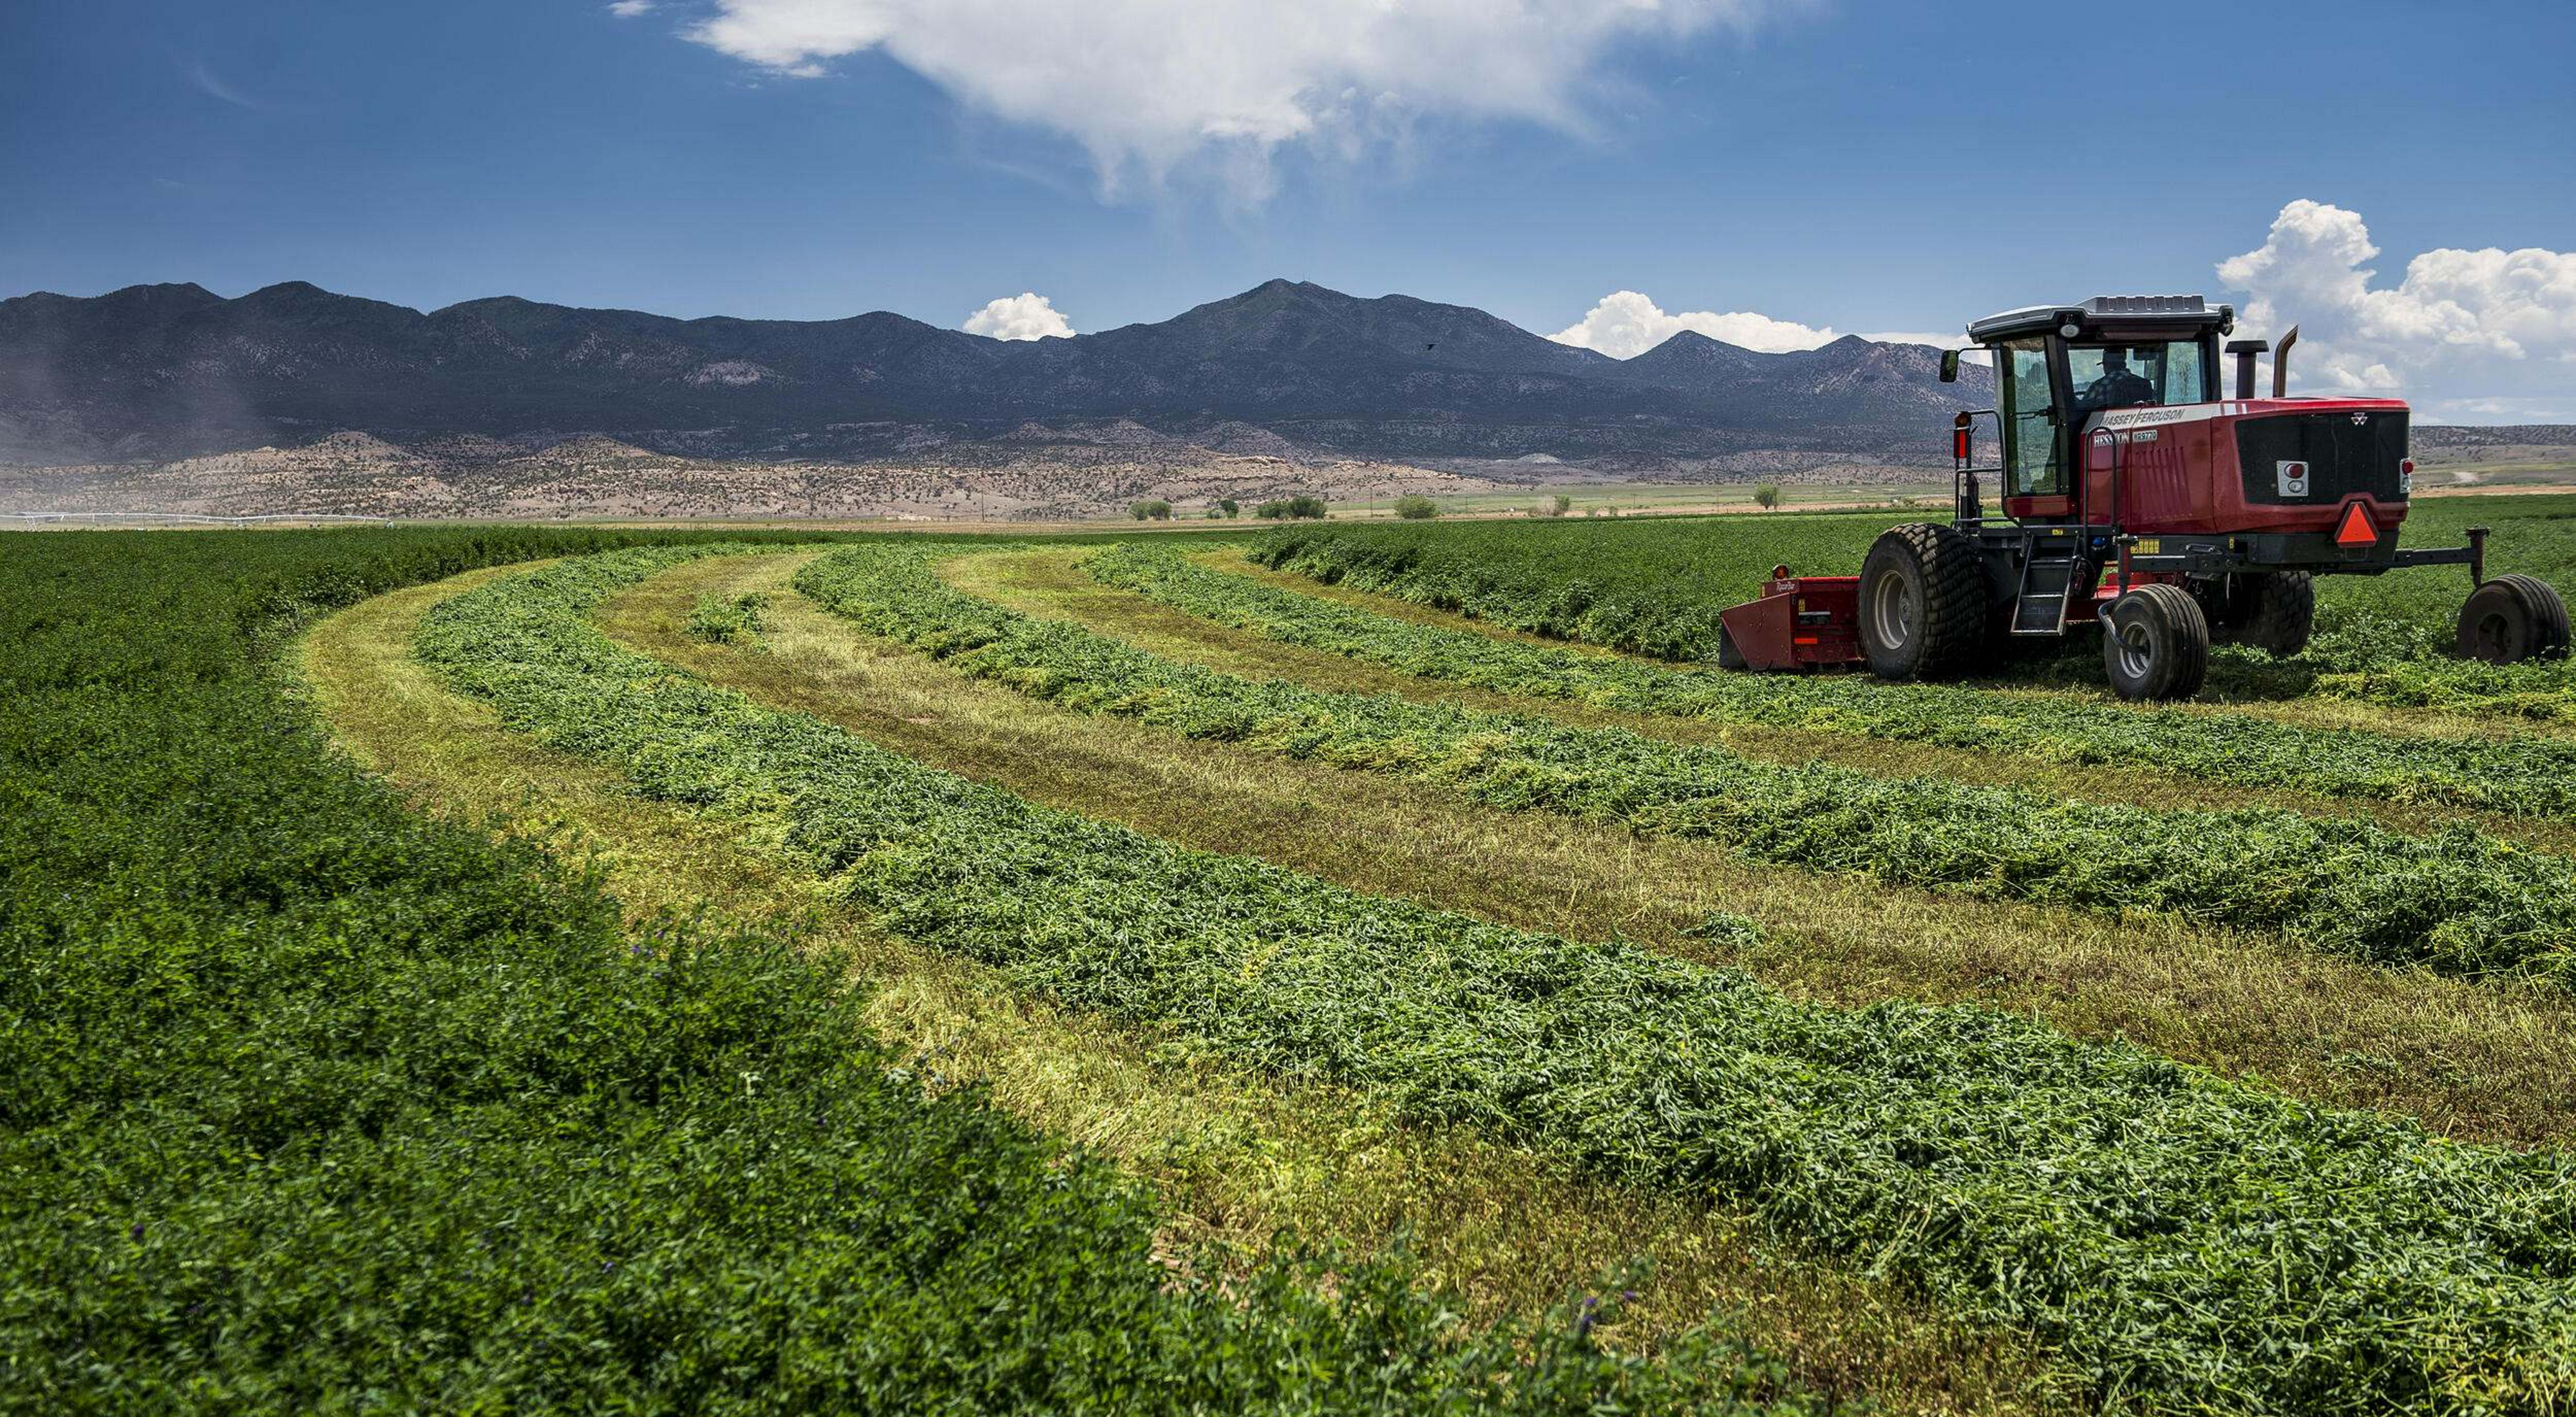 A tractor plows over farmland with mountains in the background.